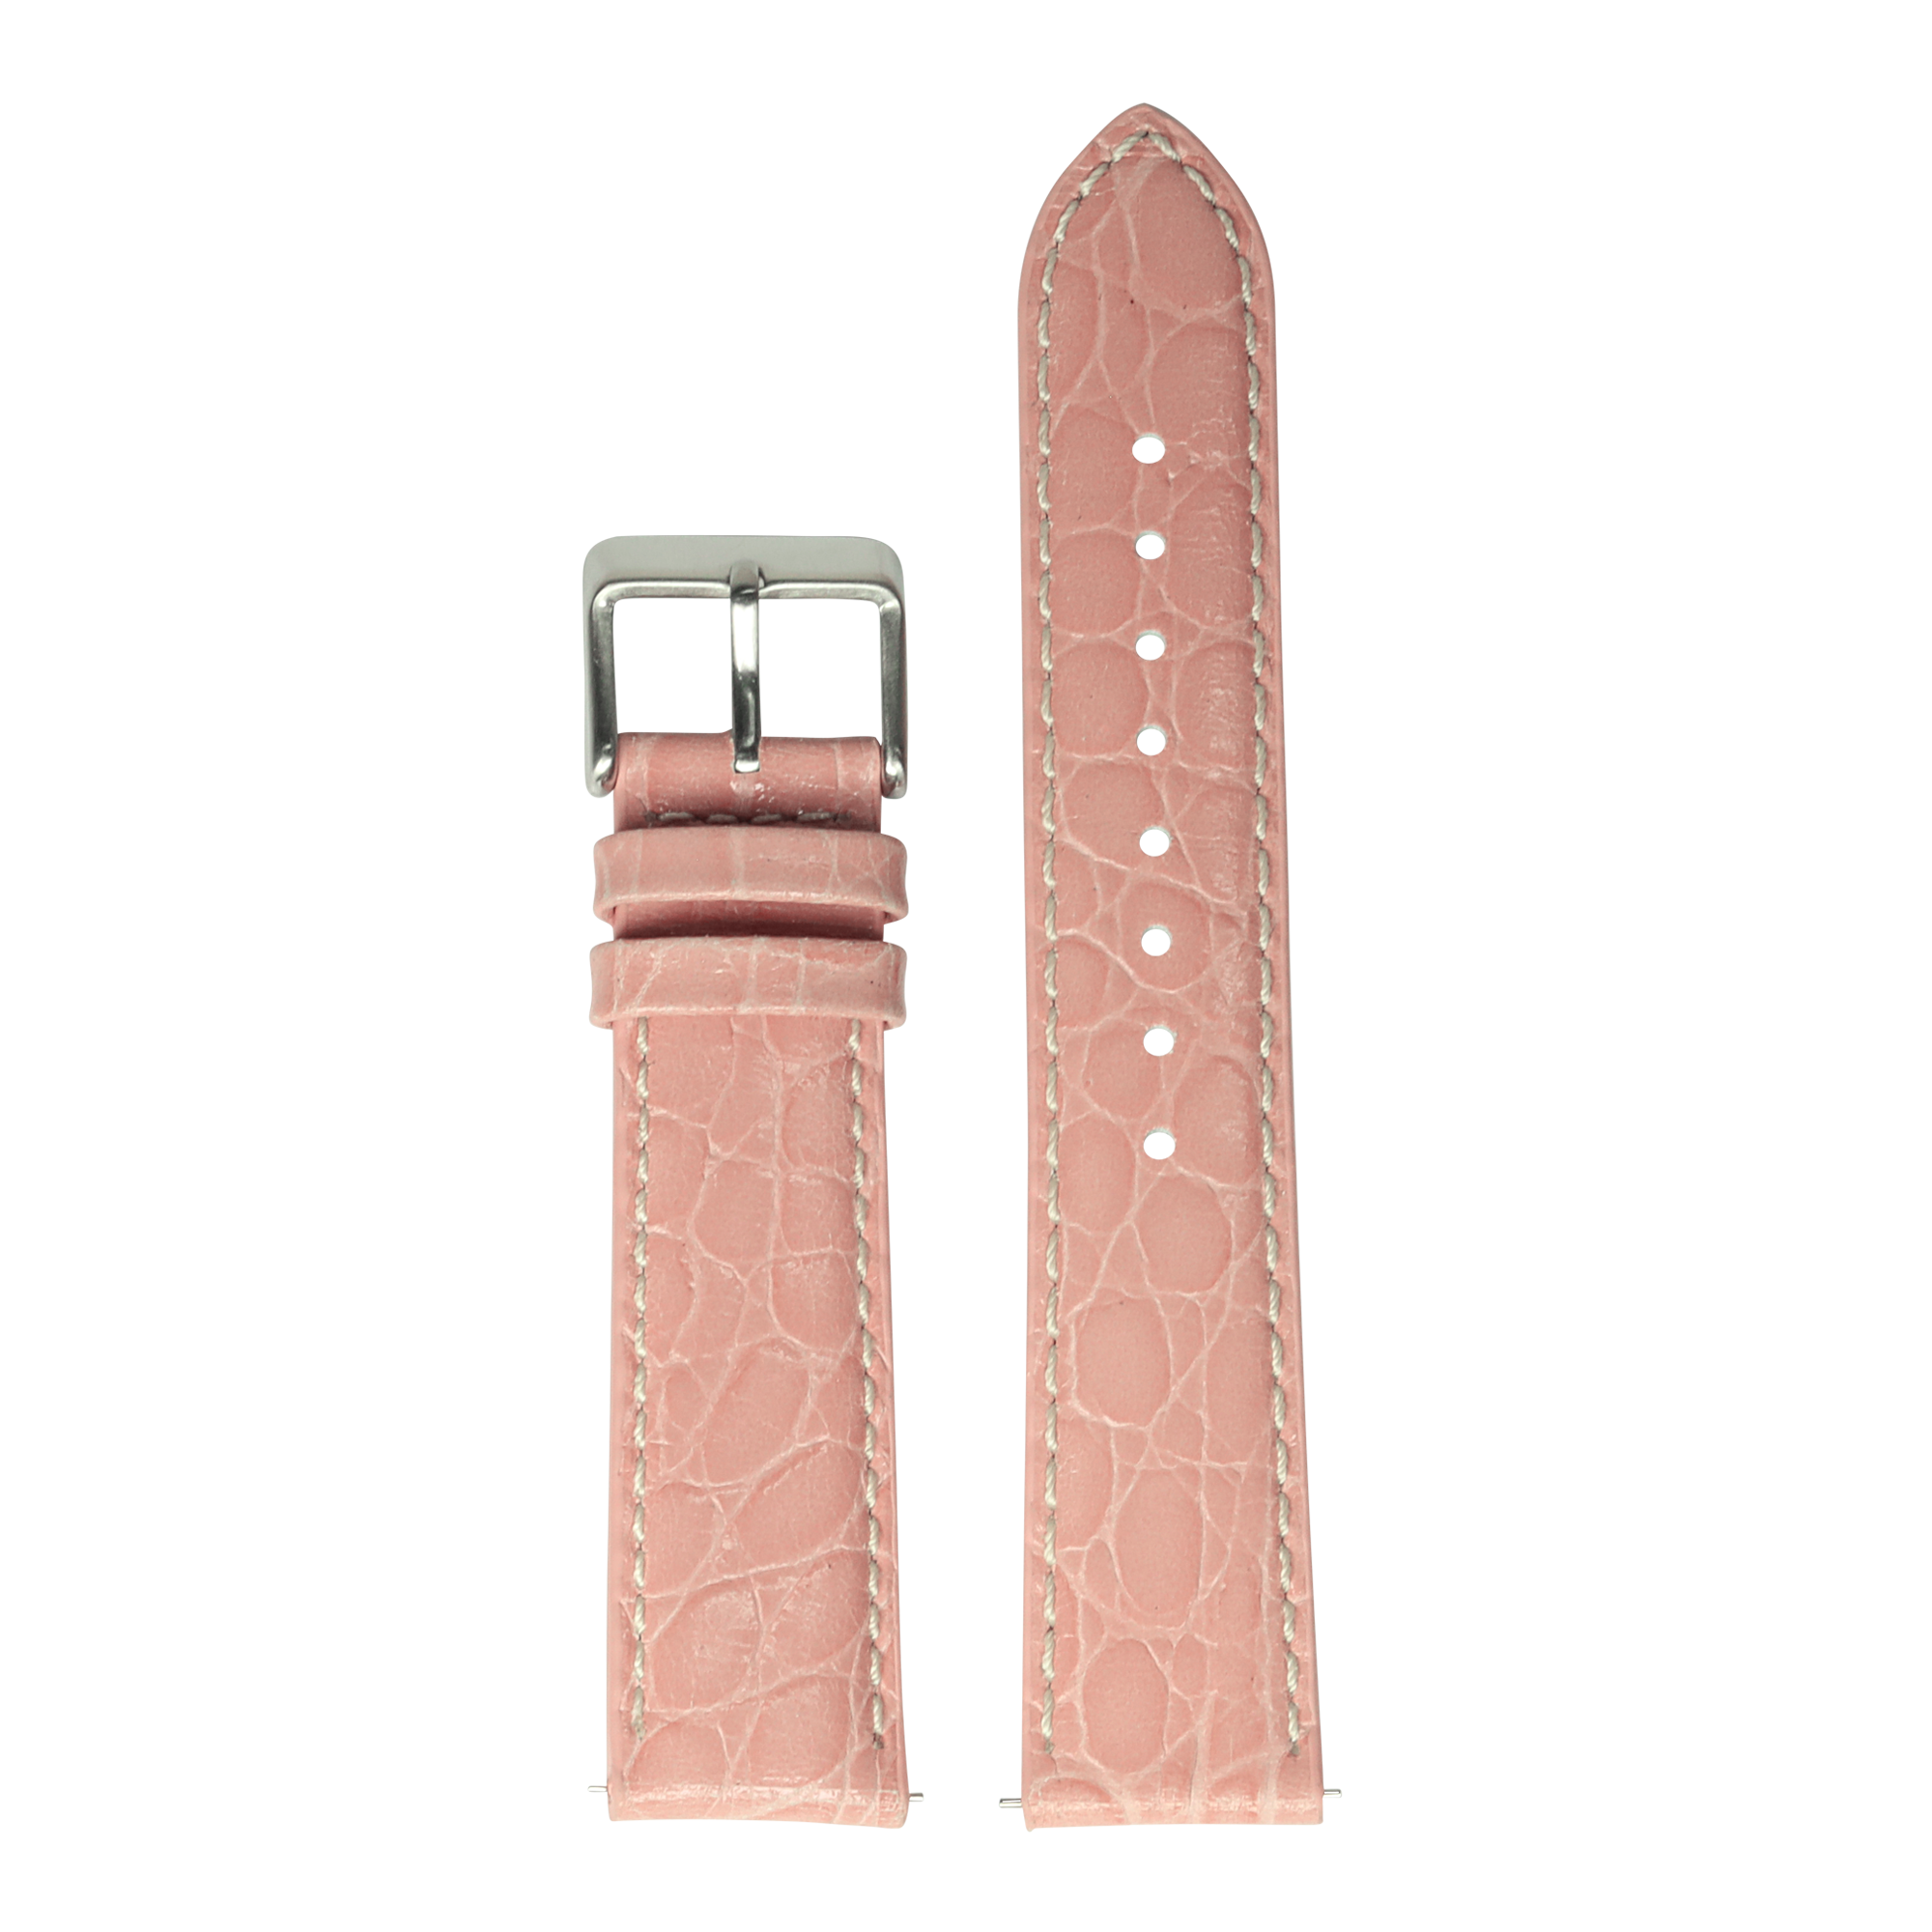 [Quick Release] Alligator Leather - Pink with White Stitching